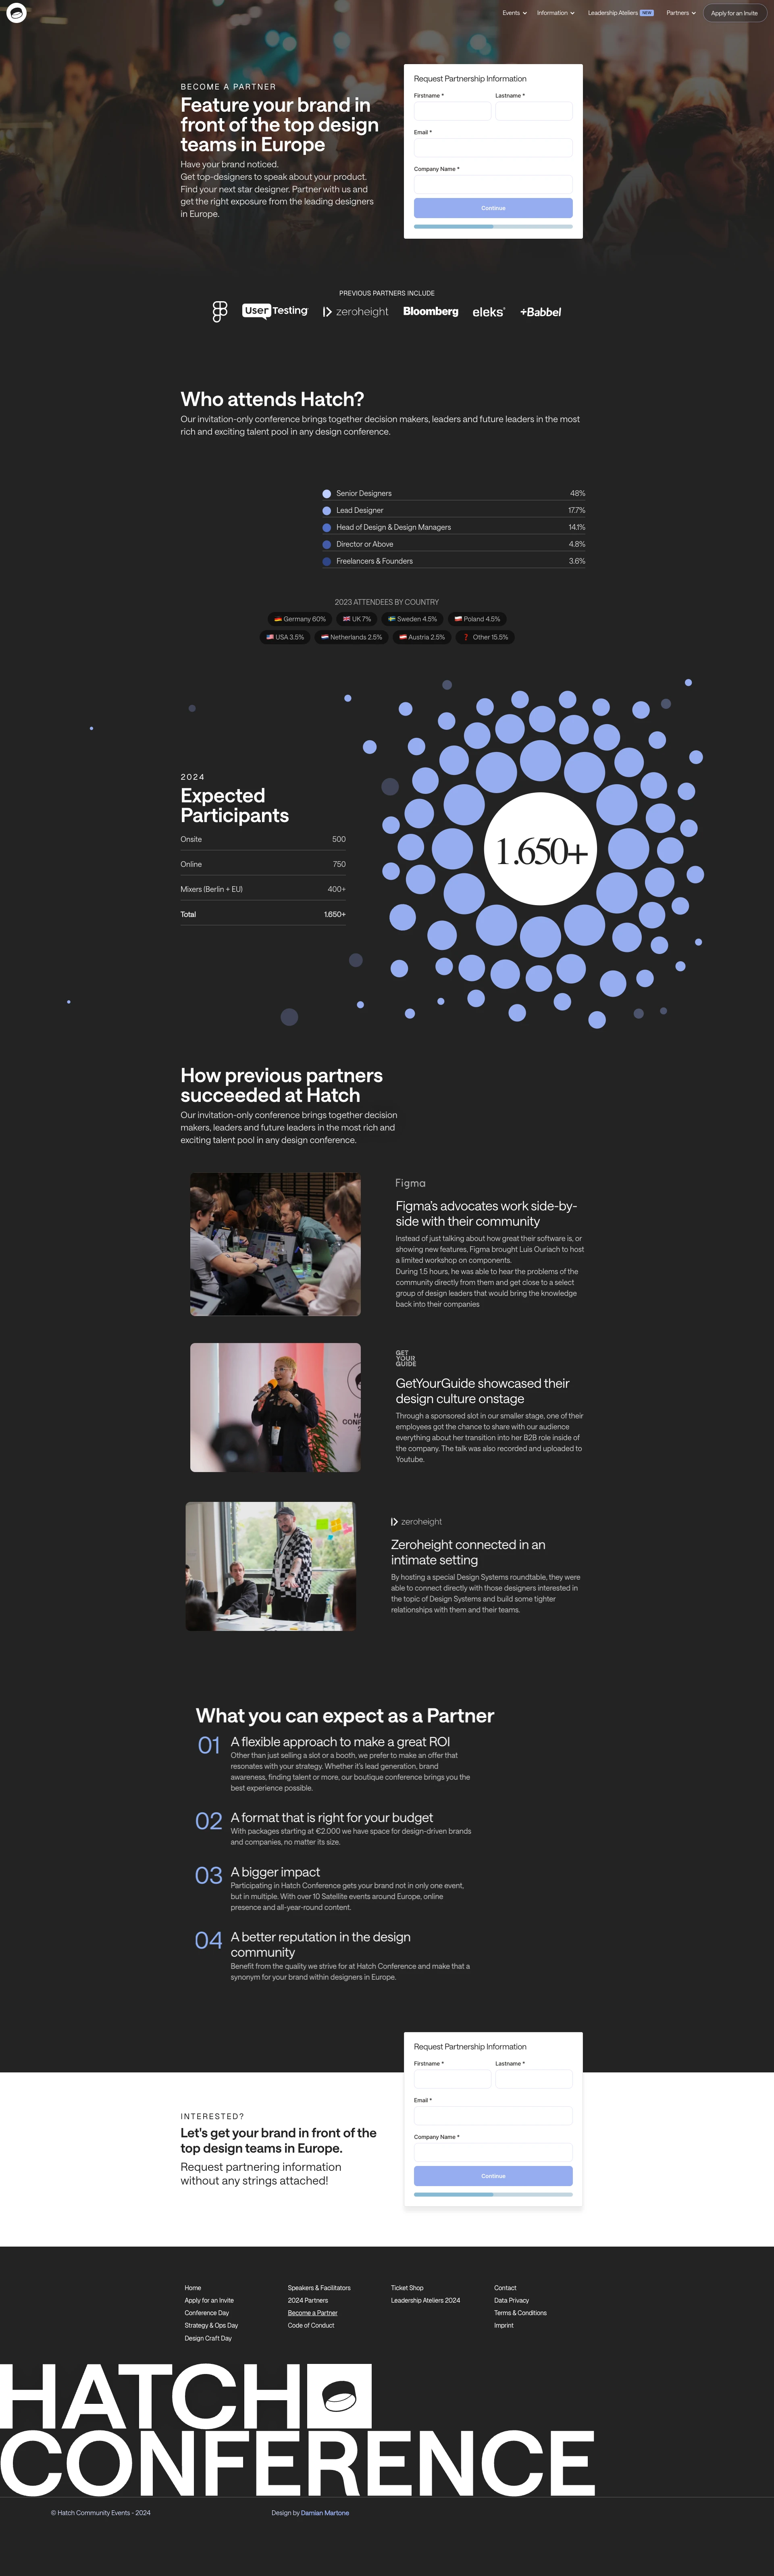 Hatch Conference Landing Page Example: The event where experienced UX & Design Professionals in Europe meet to learn, get inspired and connect.